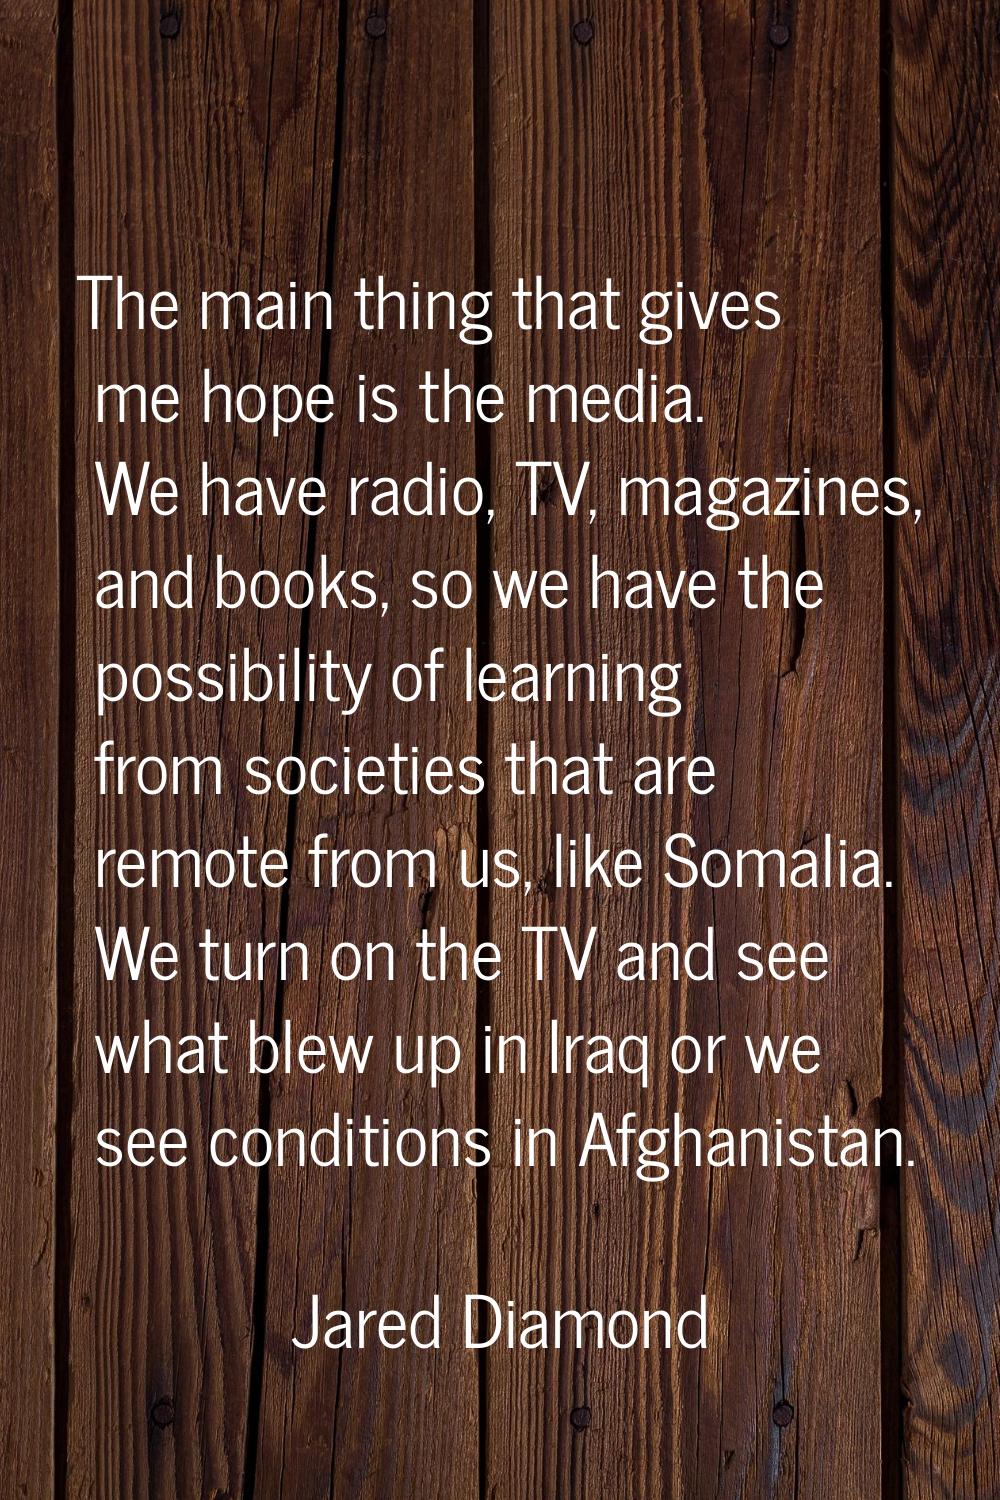 The main thing that gives me hope is the media. We have radio, TV, magazines, and books, so we have